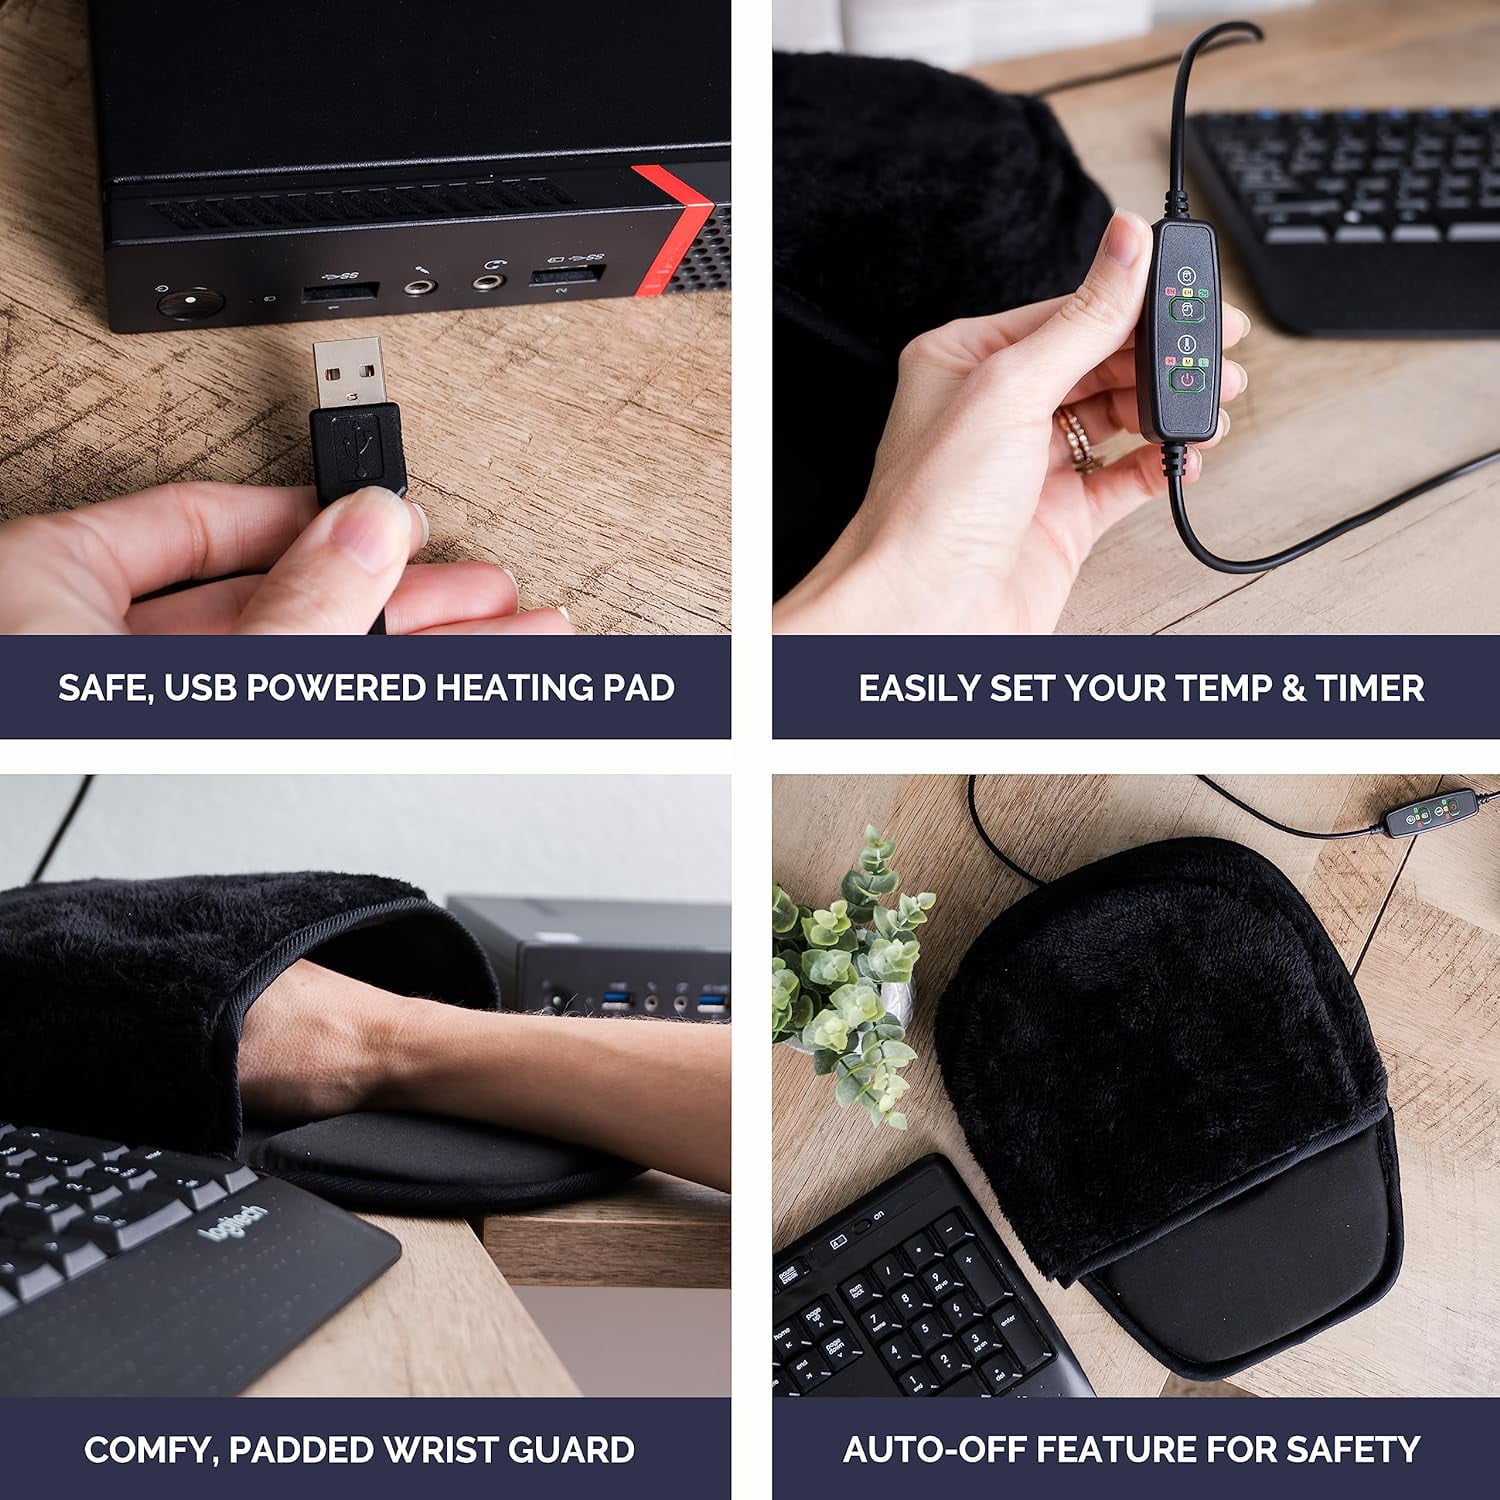 DeskHeat Heated Desk, Keyboard, Mouse Pad - Stops Cold Hands!